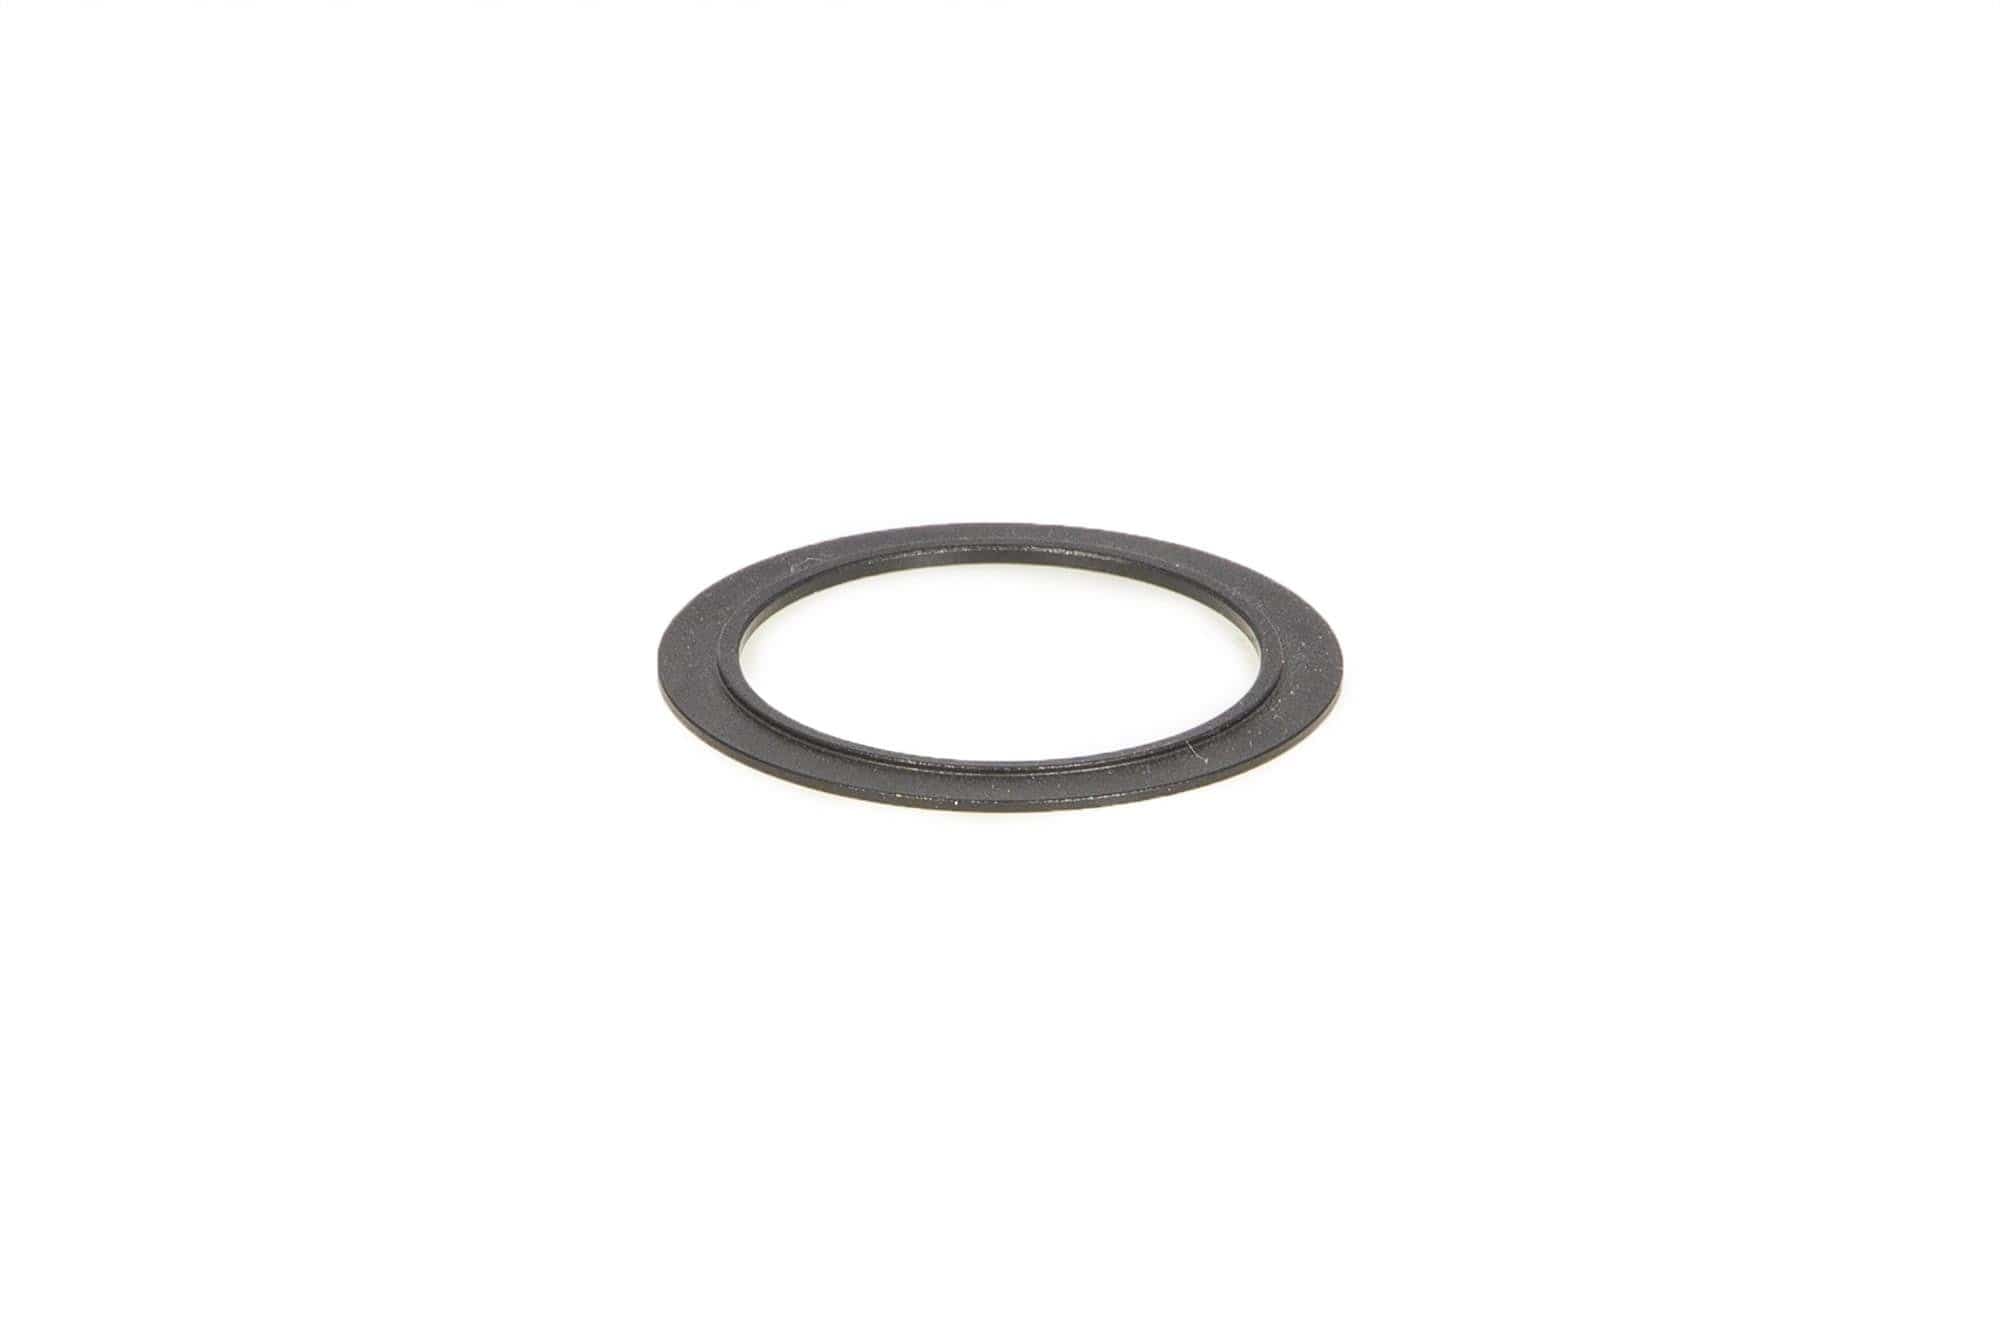 Baader Planetarium Accessory Baader Adjustment-Ring to mount MaxBright II Binocular and T-2 Star Diagonals/Mirrors (requires use of #2458271) - 2458272